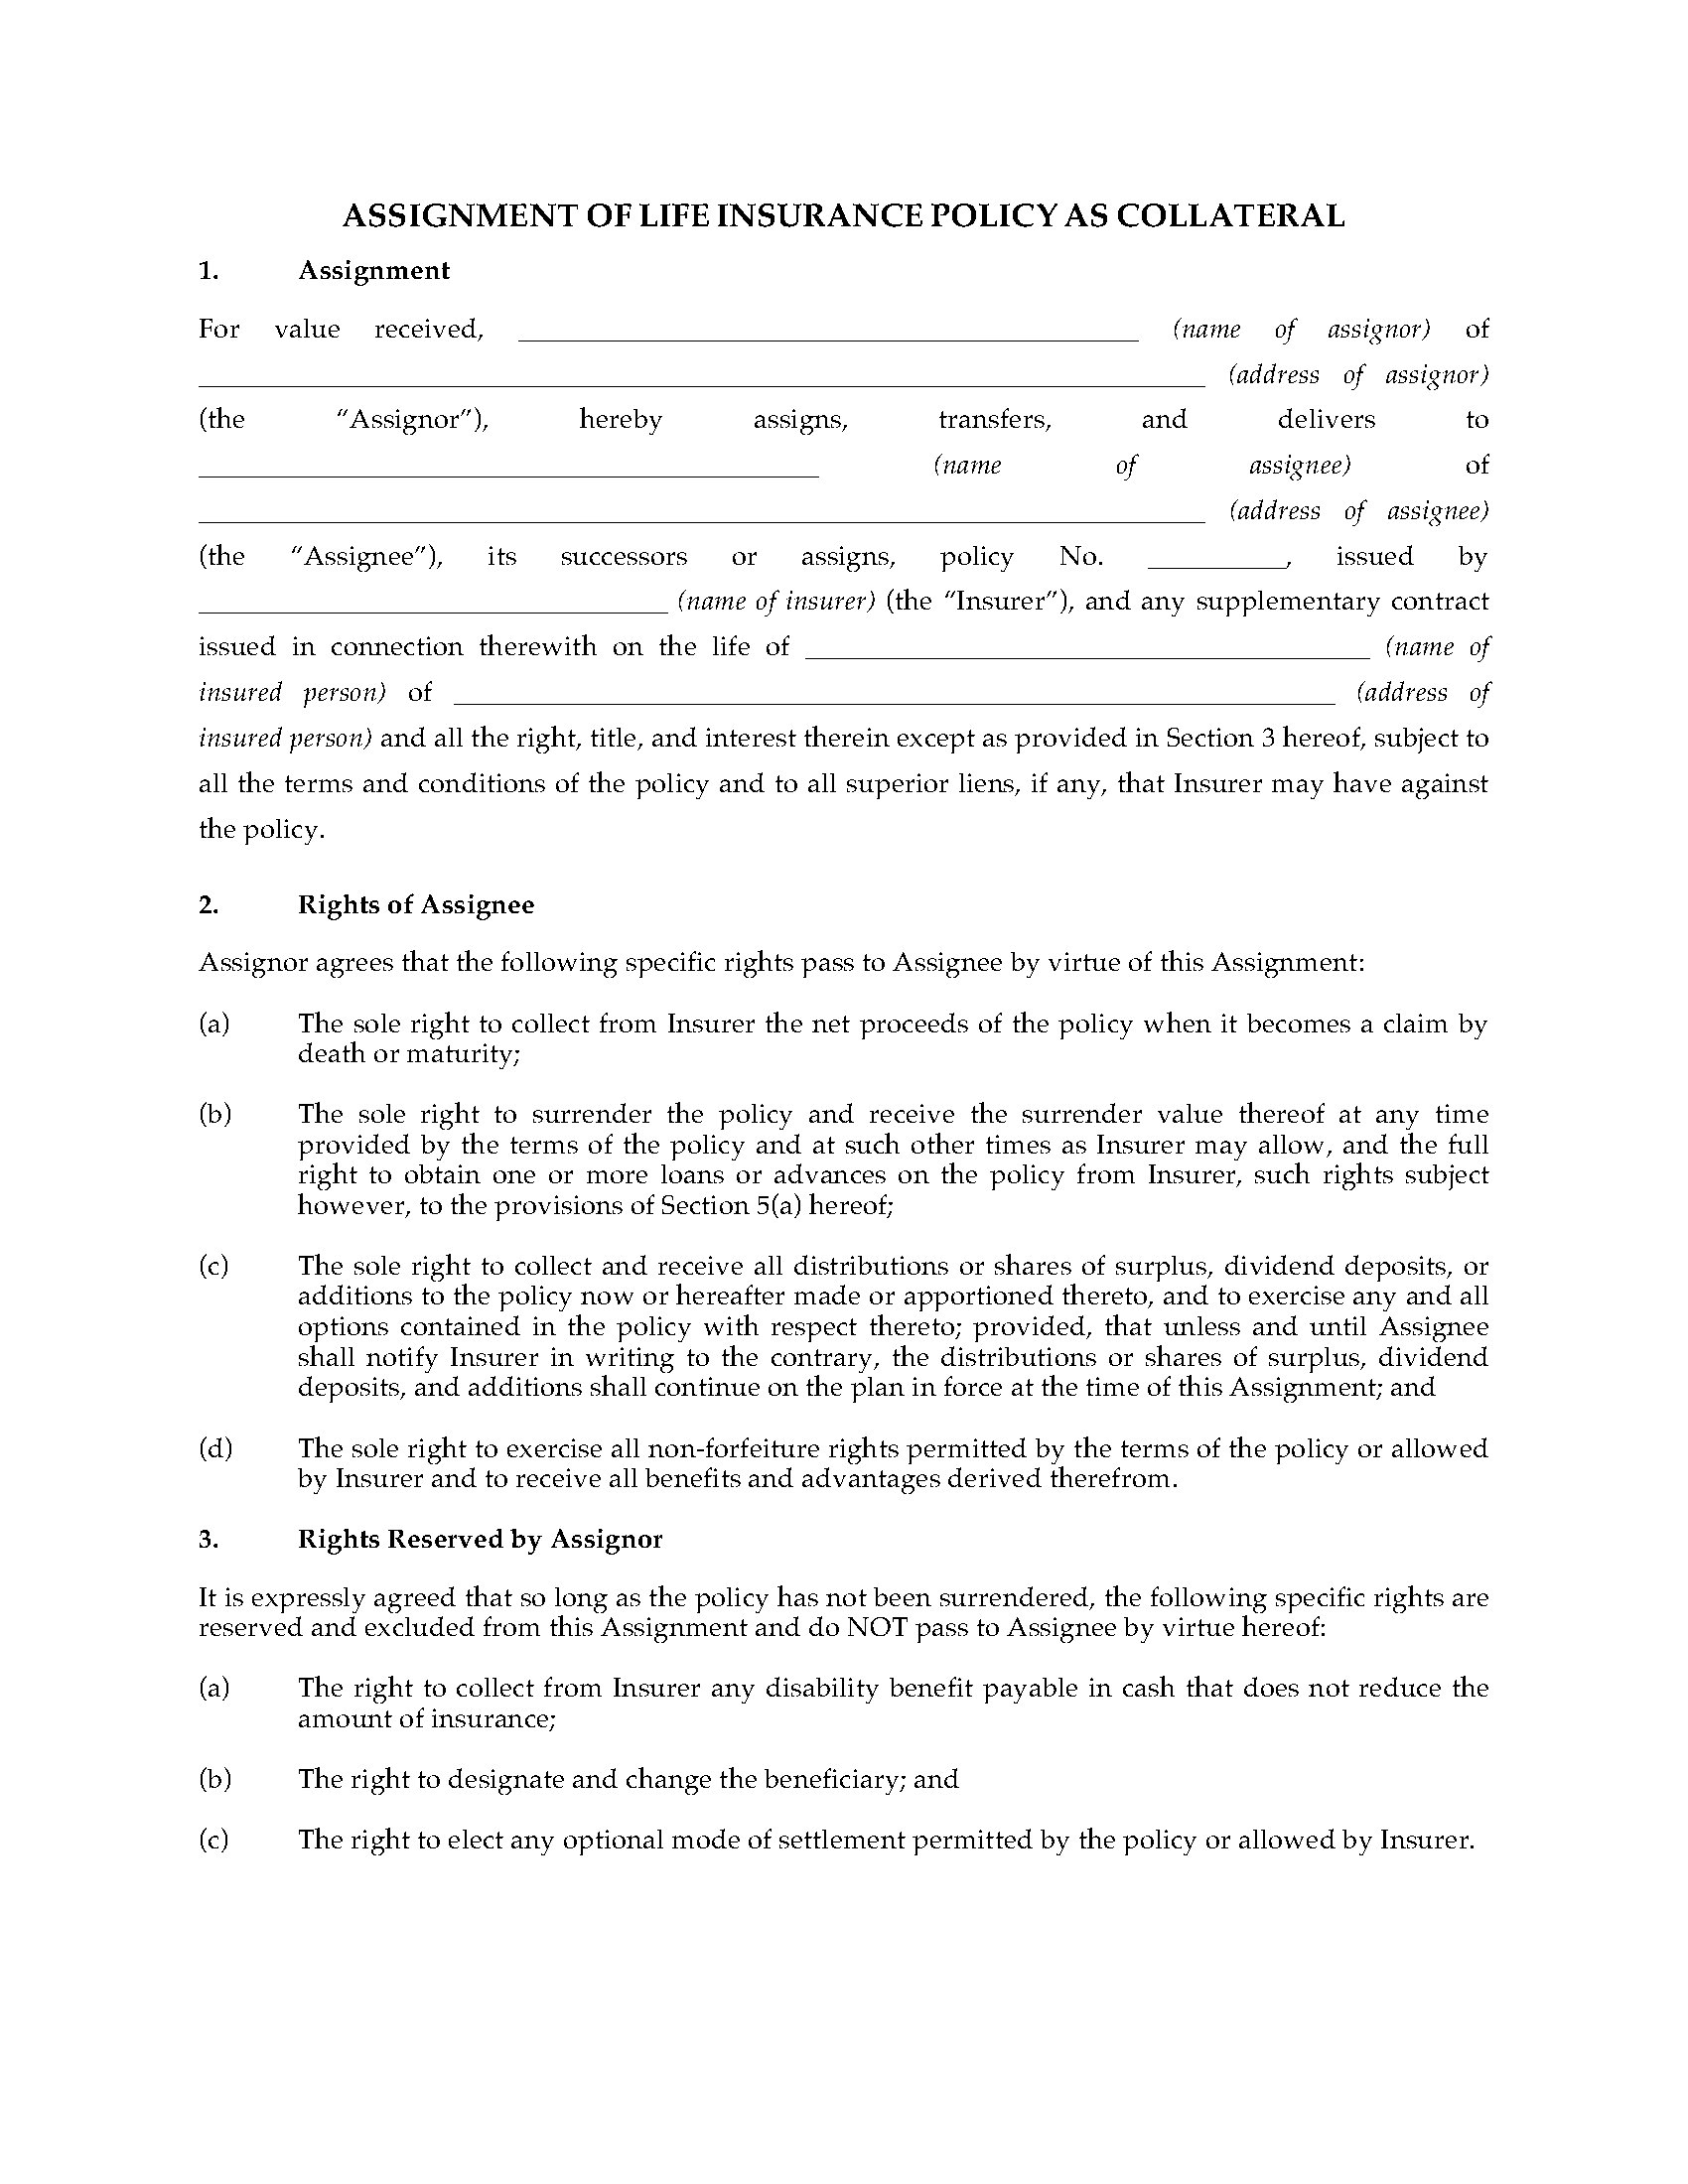 aaa life insurance collateral assignment form